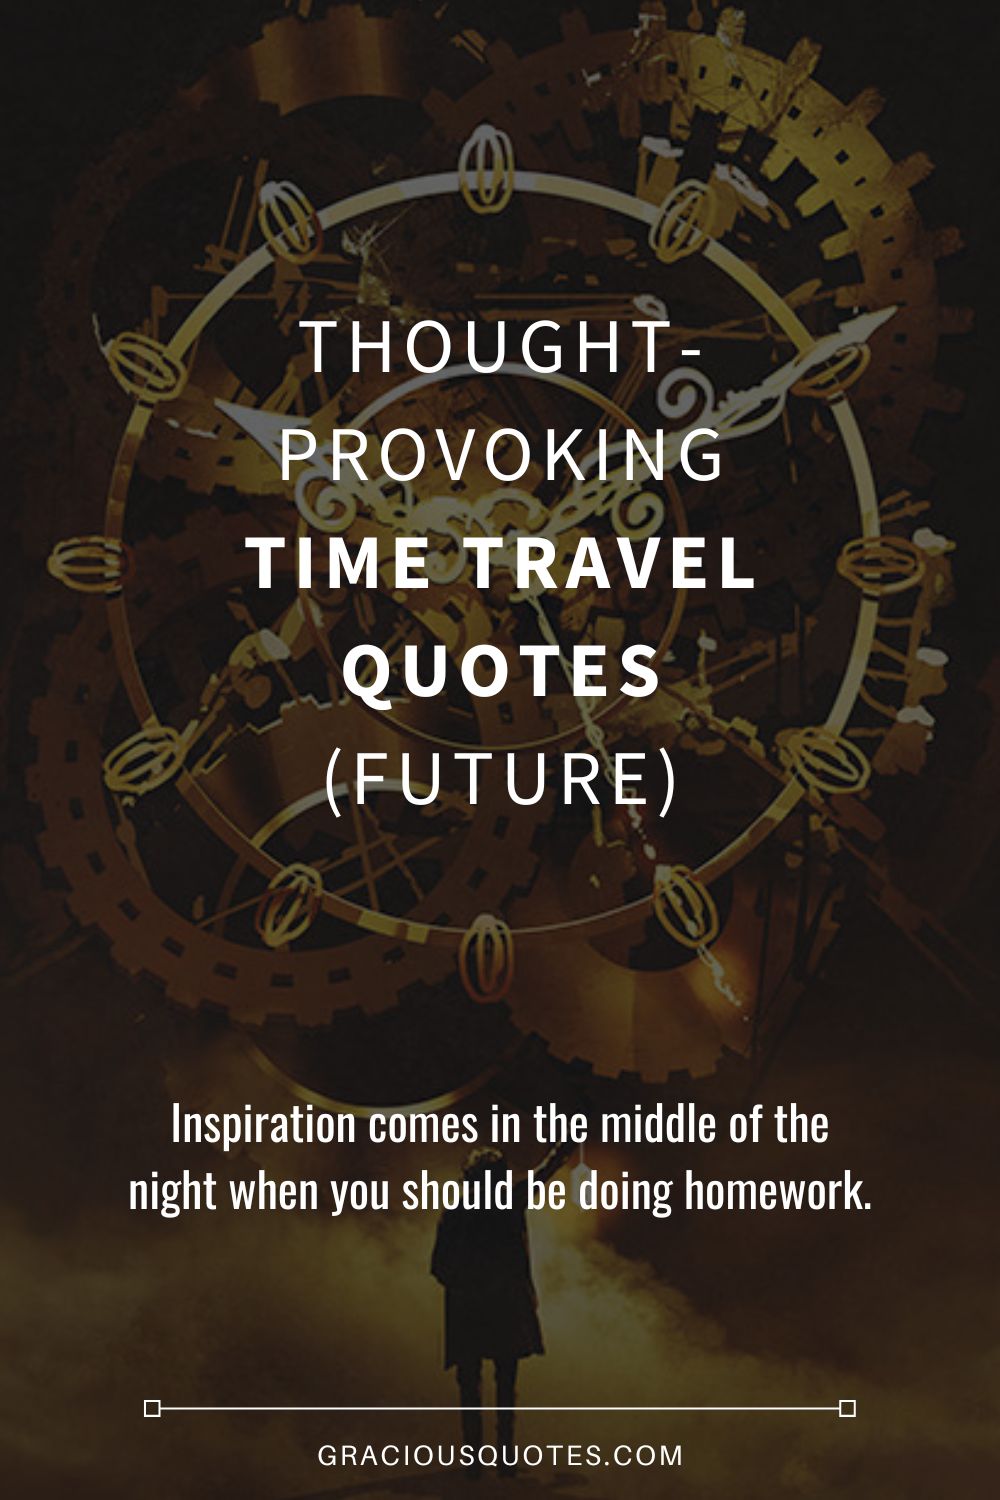 Thought-provoking Time Travel Quotes (FUTURE) - Gracious Quotes